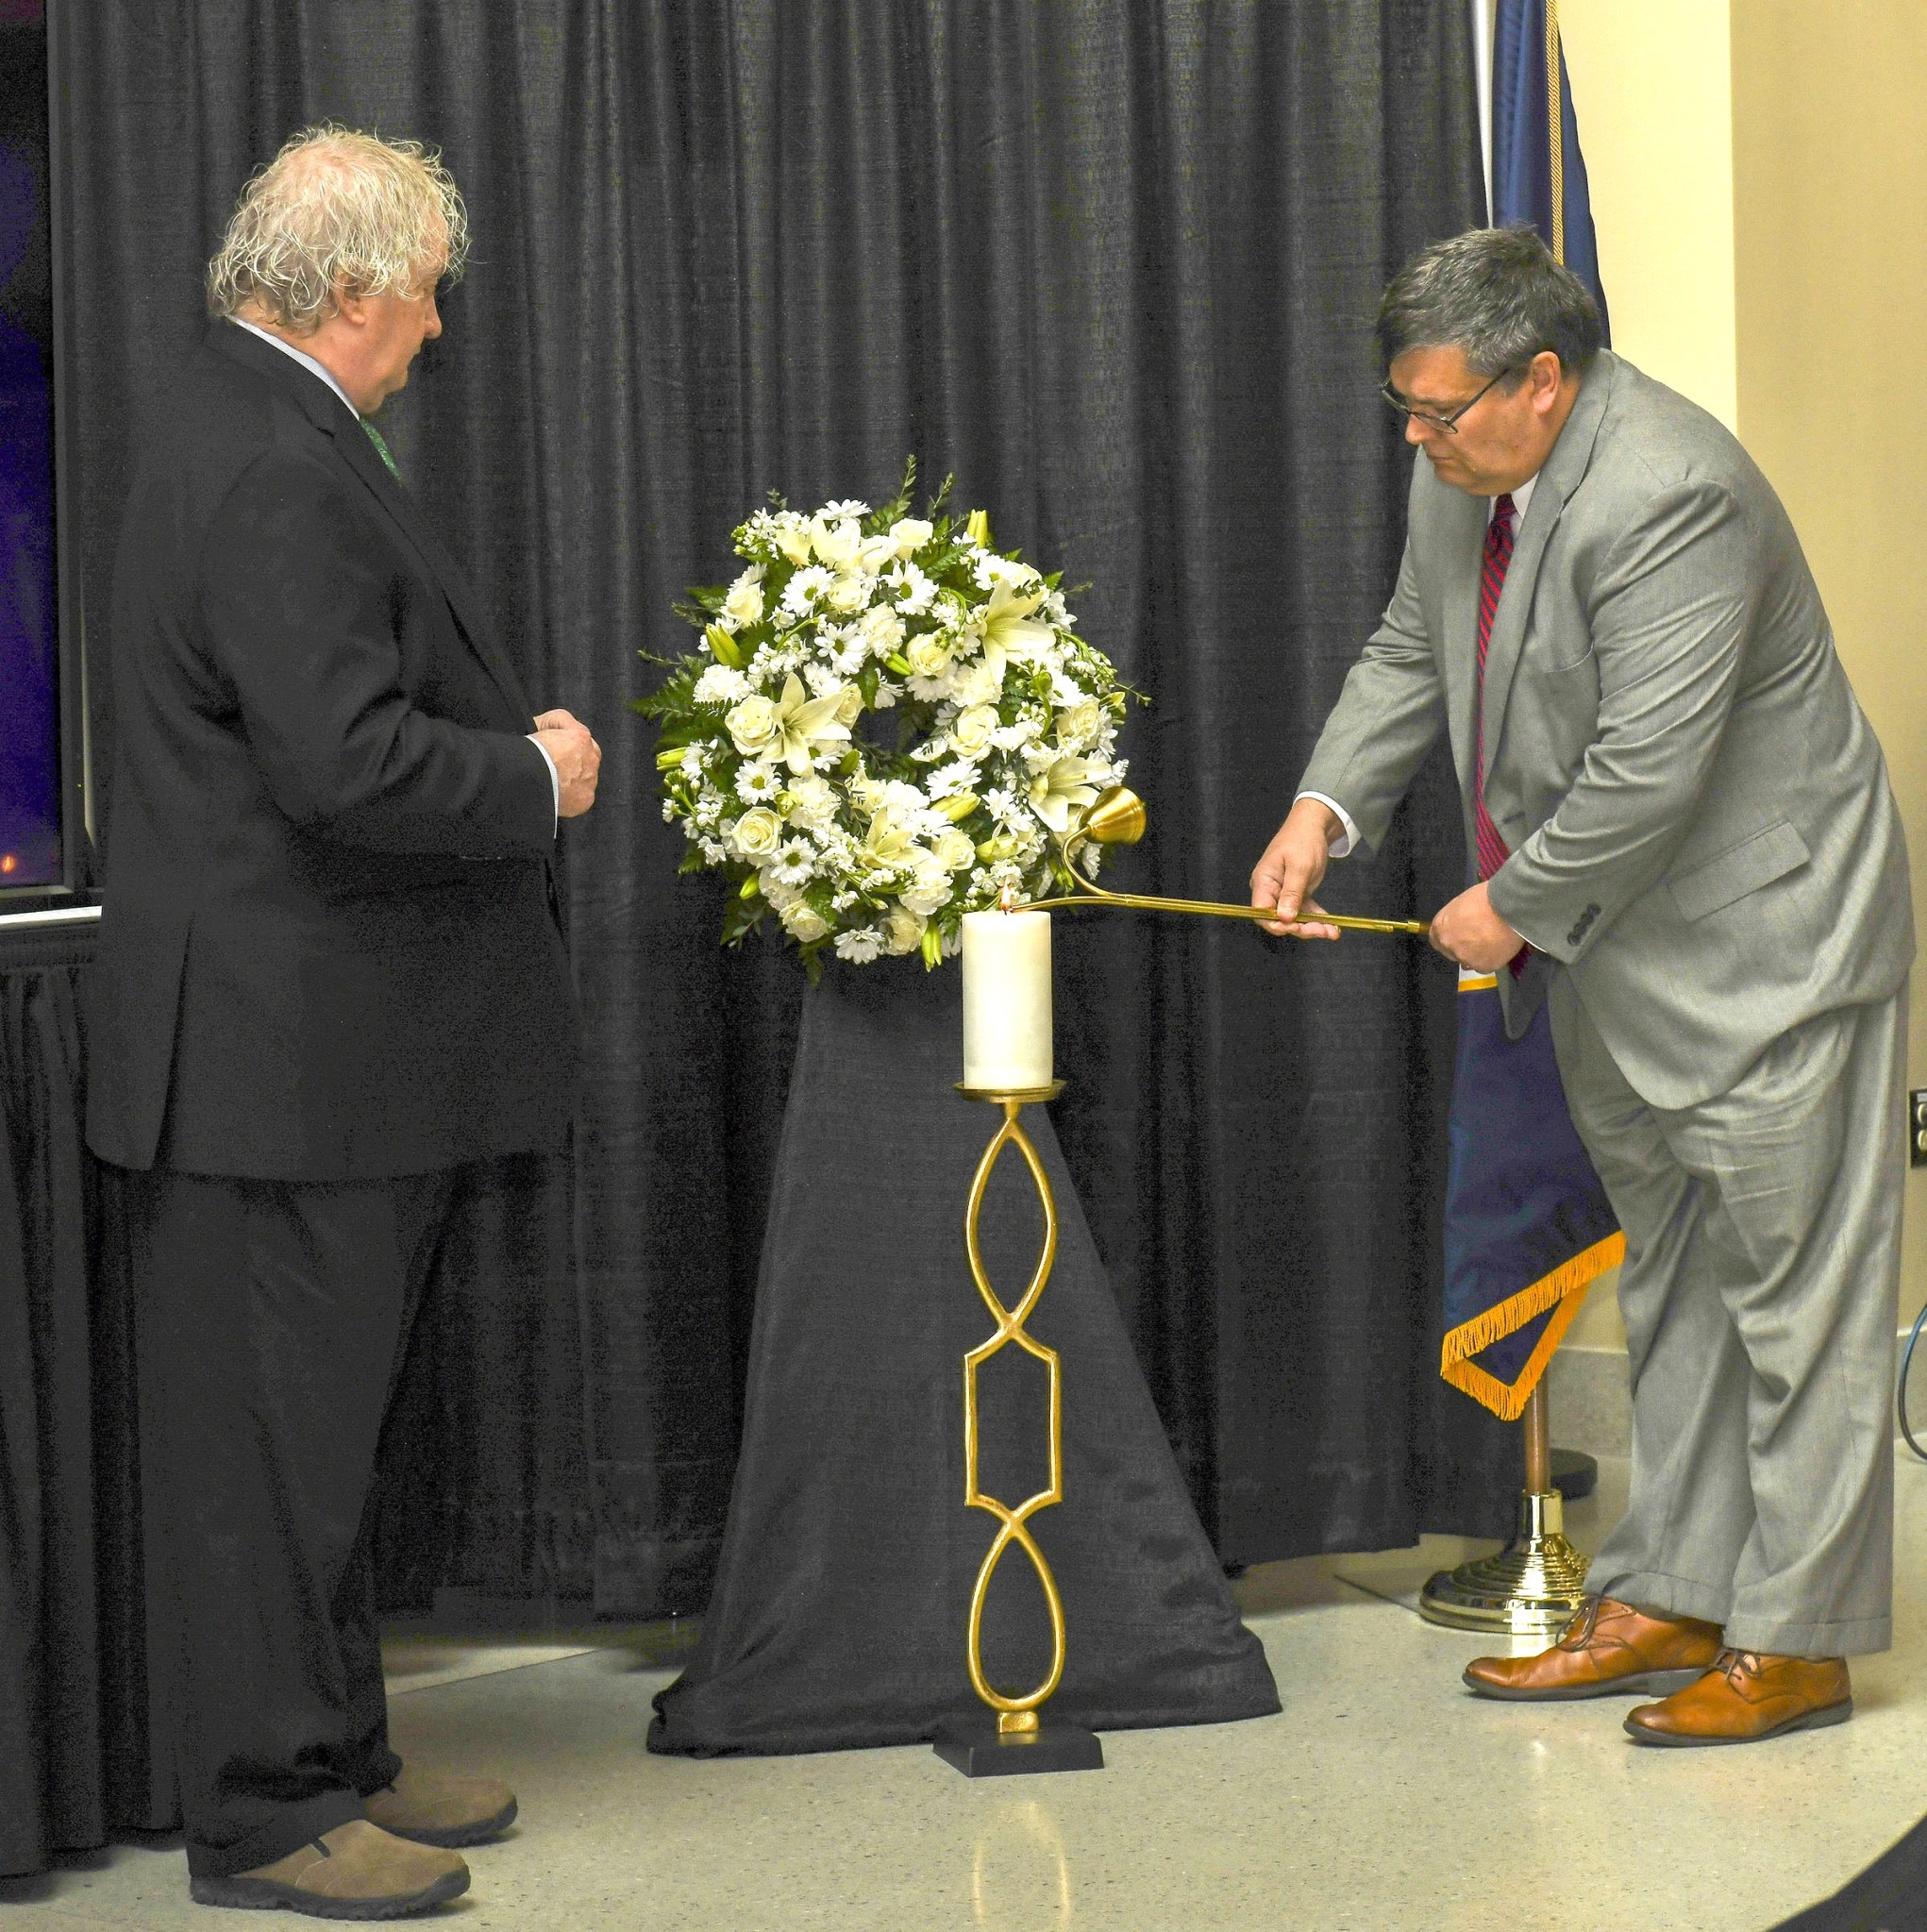 Bill Hill, left, director of Marshall’s Safety and Mission Assurance Directorate, observes Larry Leopard, Marshall associate director, technical, lighting a candle in honor of those lost at the Day of Remembrance ceremony.